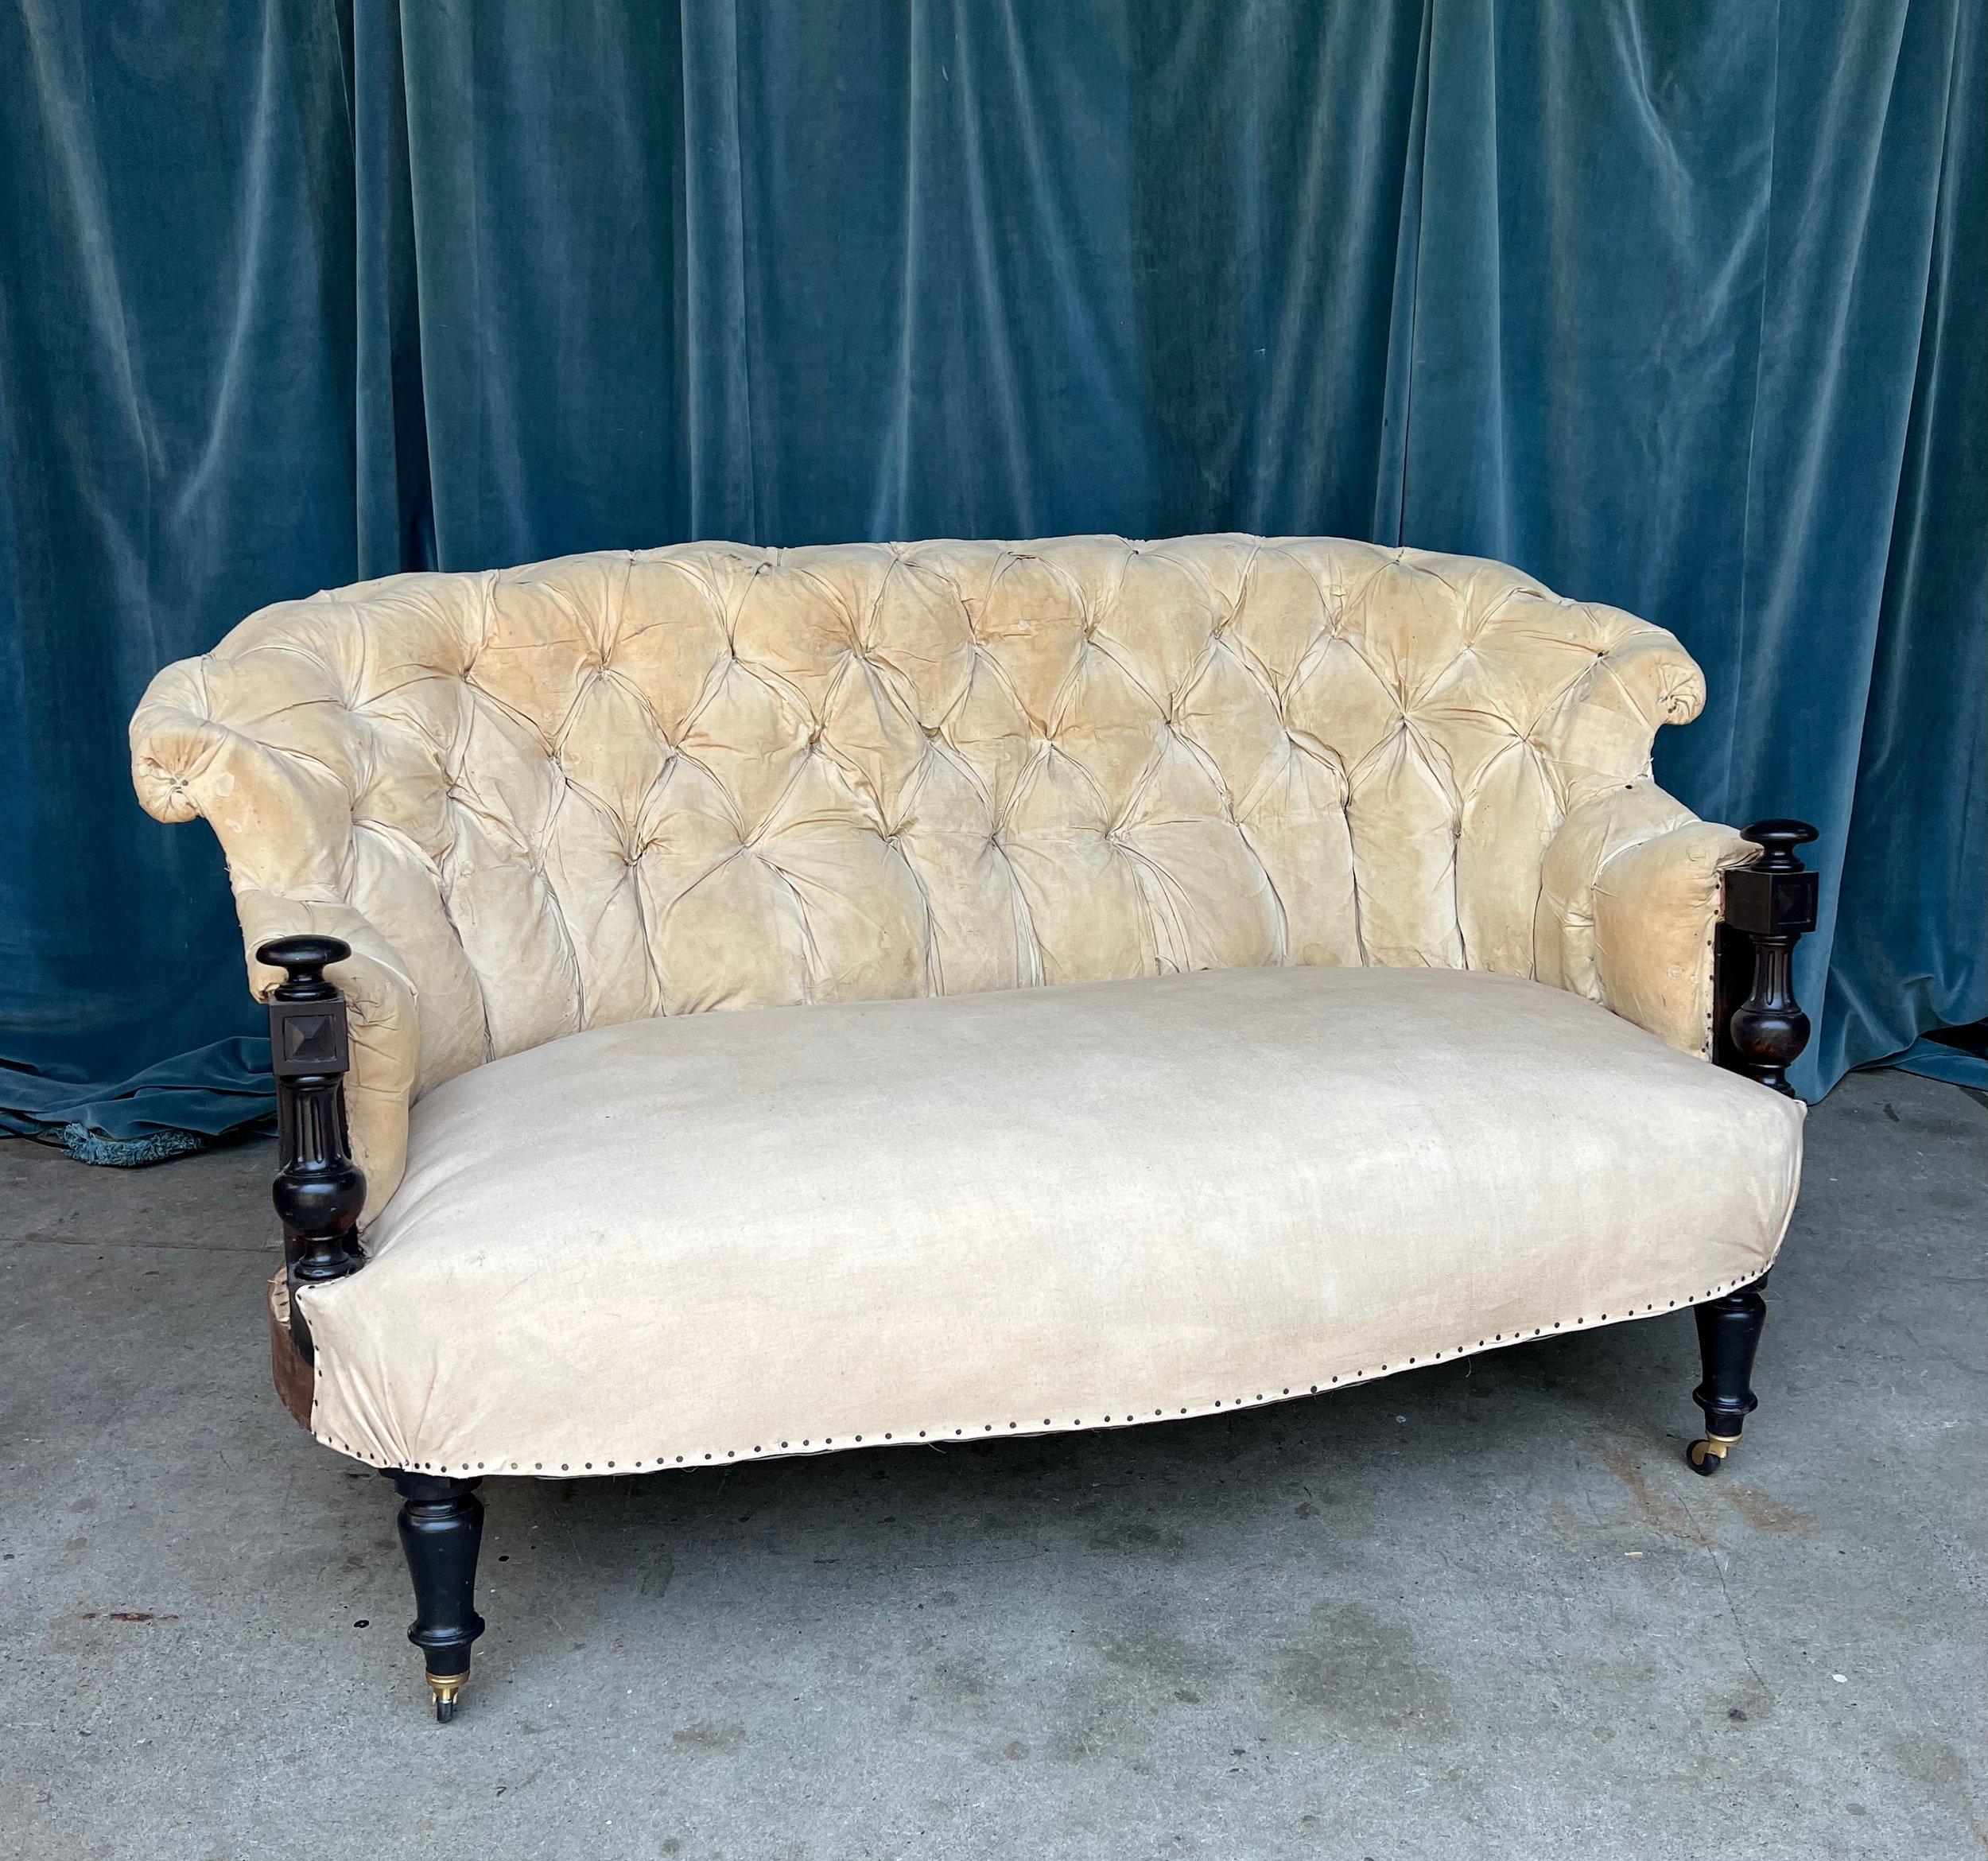 An unusual French 19th Century Napoleon III Tufted Sofa with ebonized arms. This stunning small scale Napoleon III sofa is a true testament to the elegance and craftsmanship of the era. The heavily tufted back is not only visually striking, but also